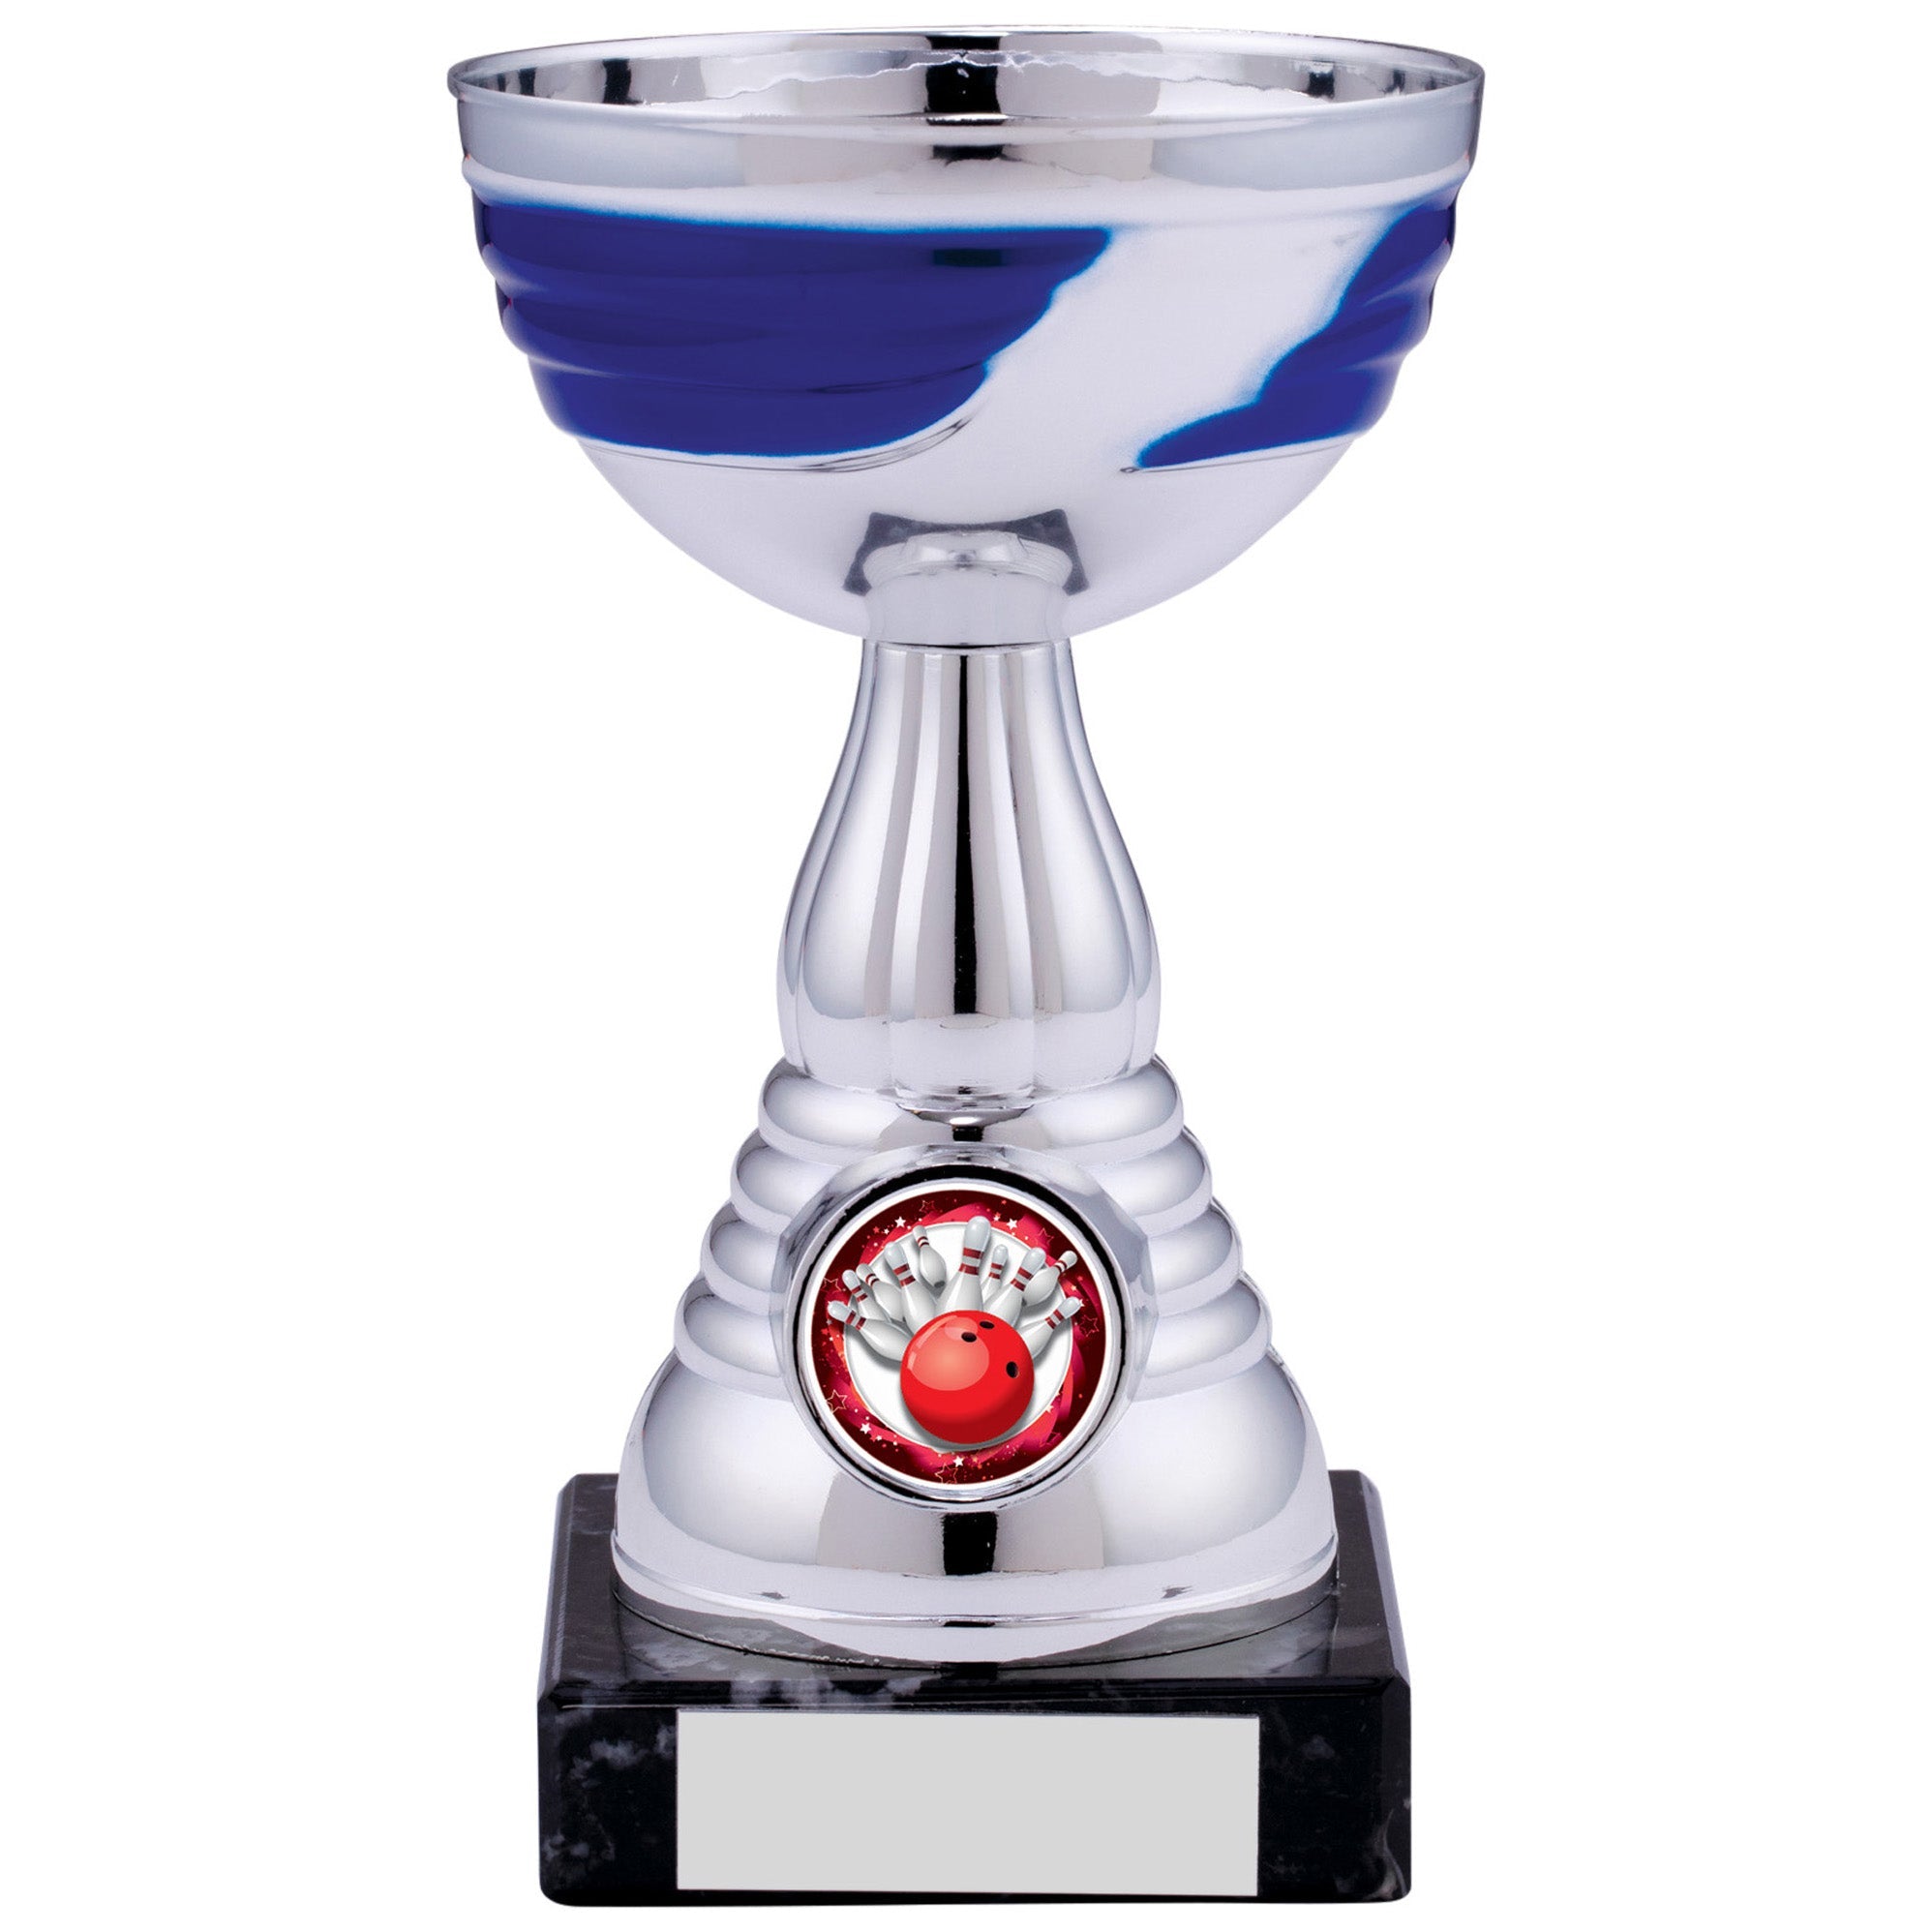 Silver Blue Trophy Cup with Blue Highlights on Black Marble Base